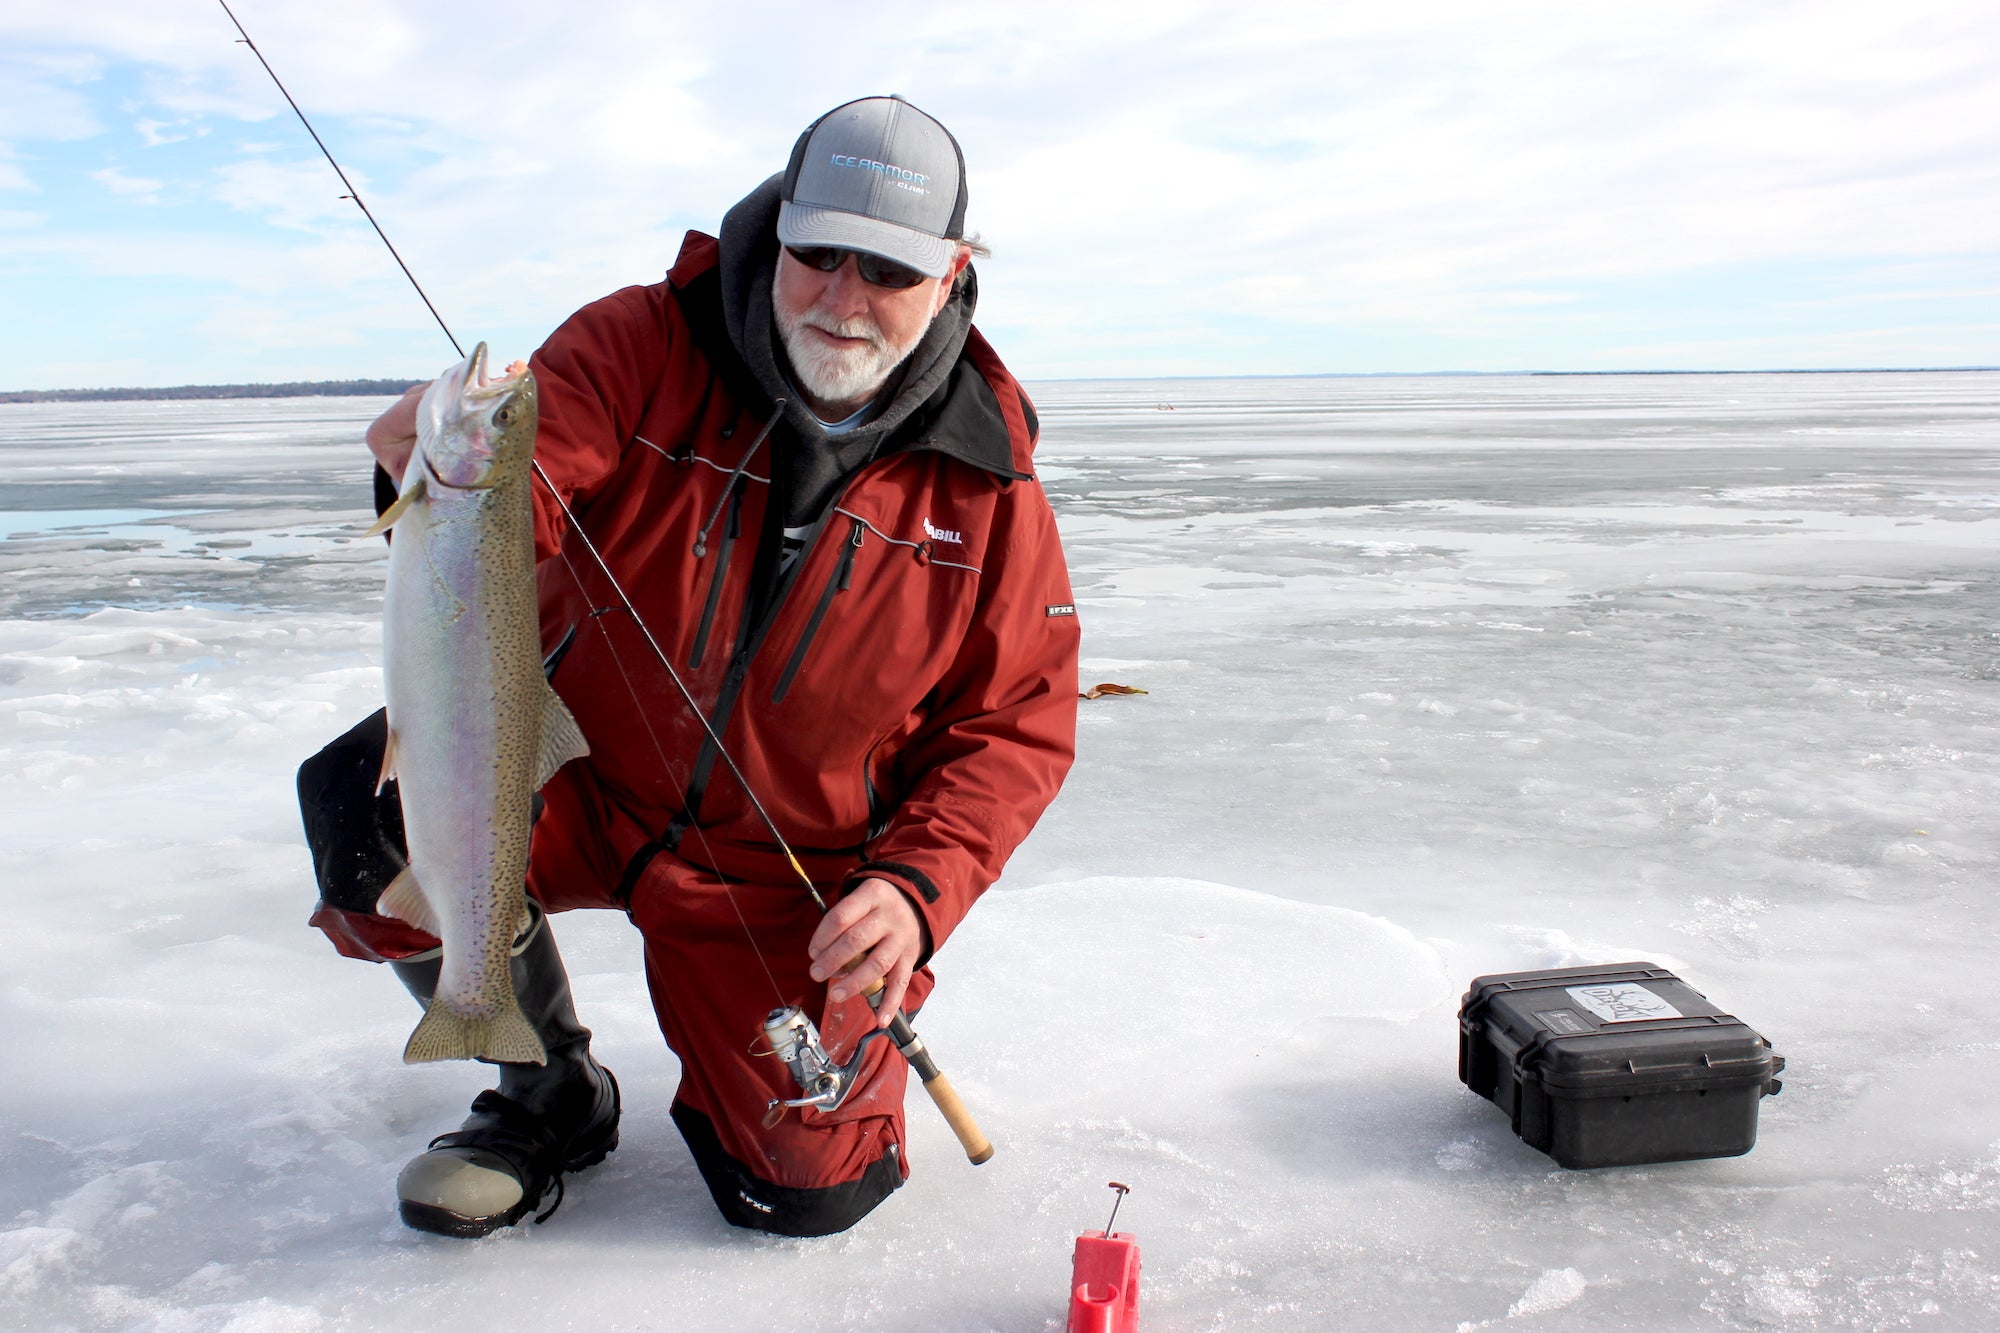 Rattle Reels: Leader Line choice and hook choice? - Ice Fishing